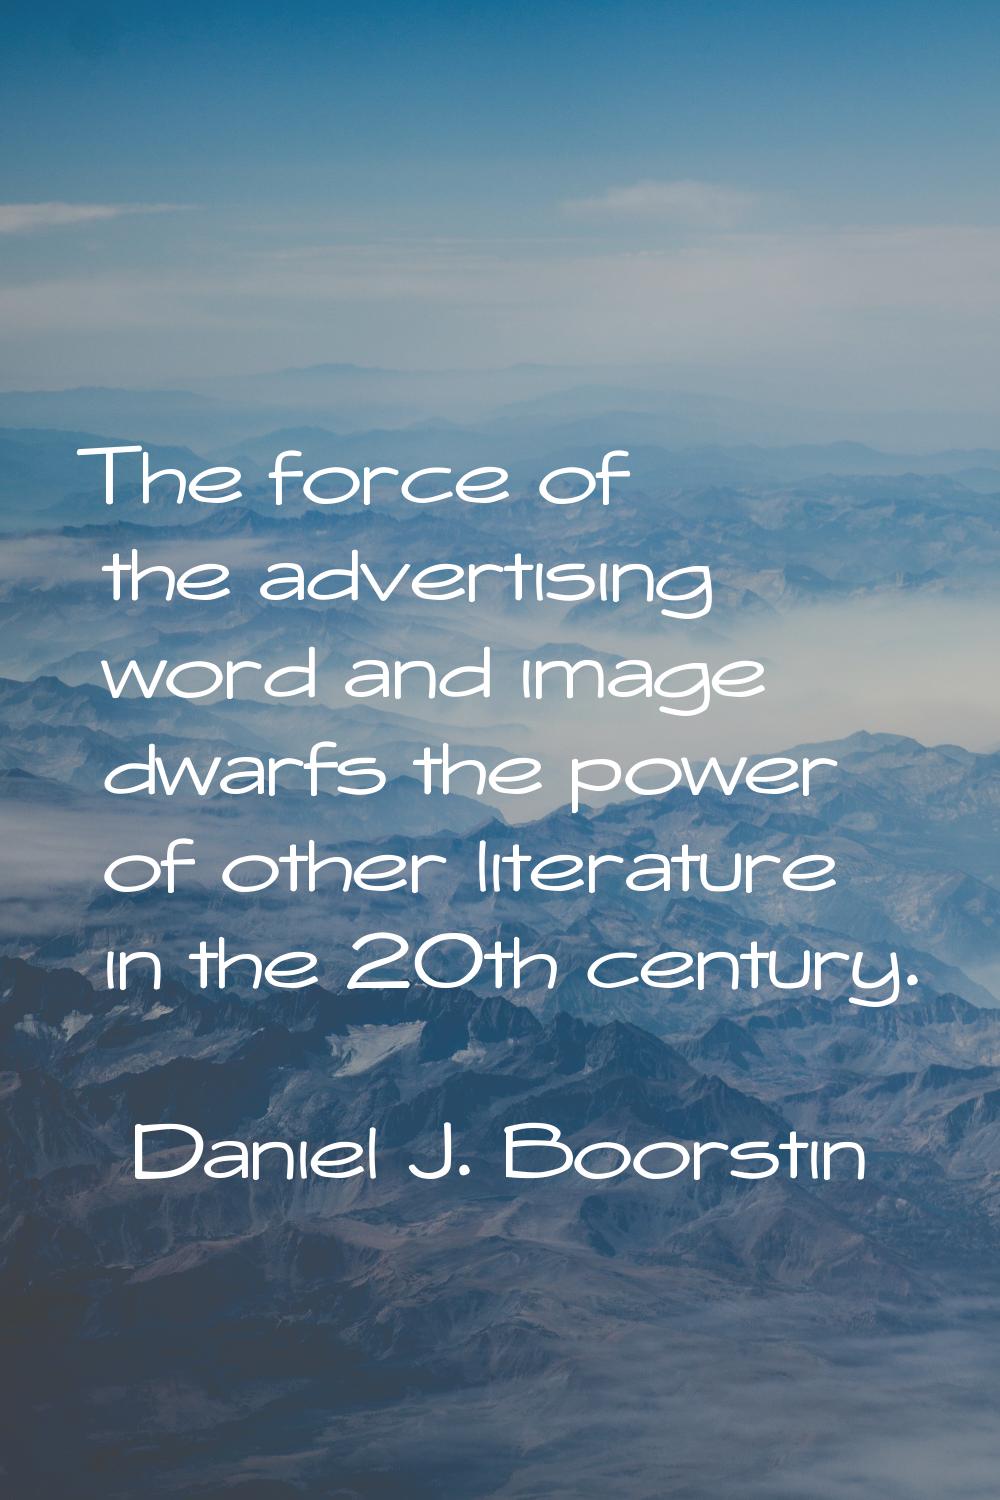 The force of the advertising word and image dwarfs the power of other literature in the 20th centur